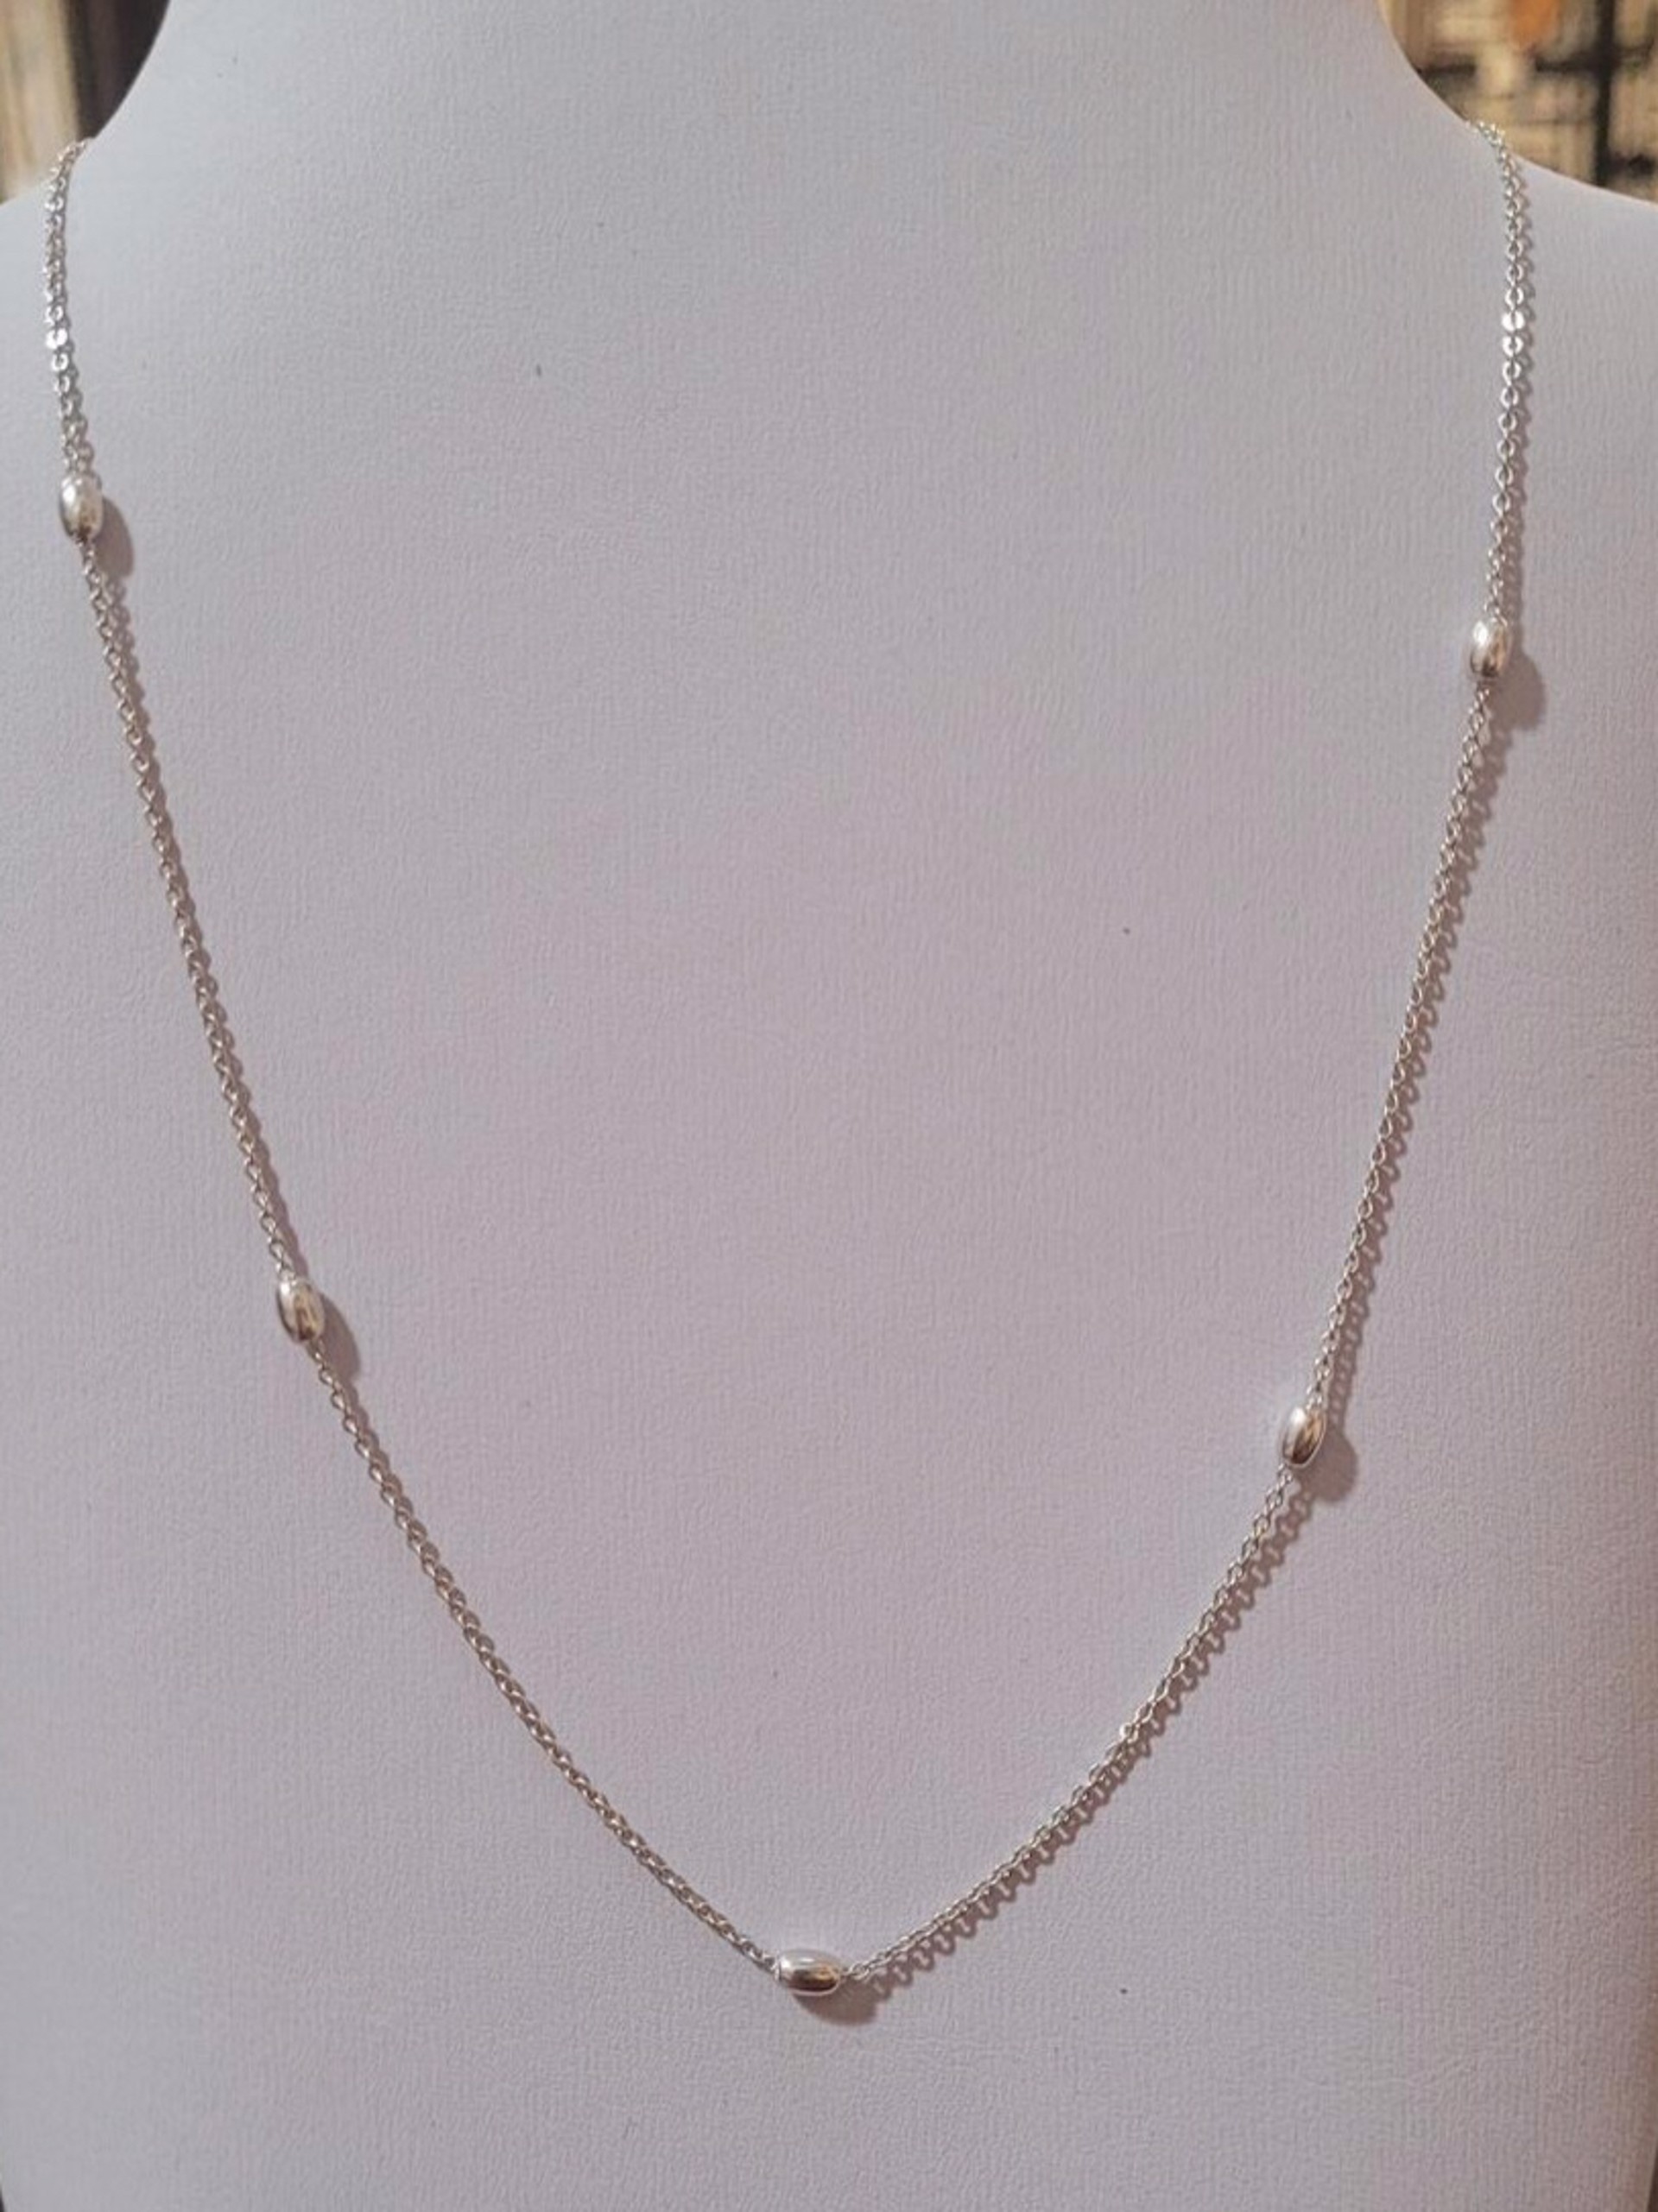 Necklace - Sterling Silver 16 " Oval Station by Indigo Desert Ranch - Jewelry